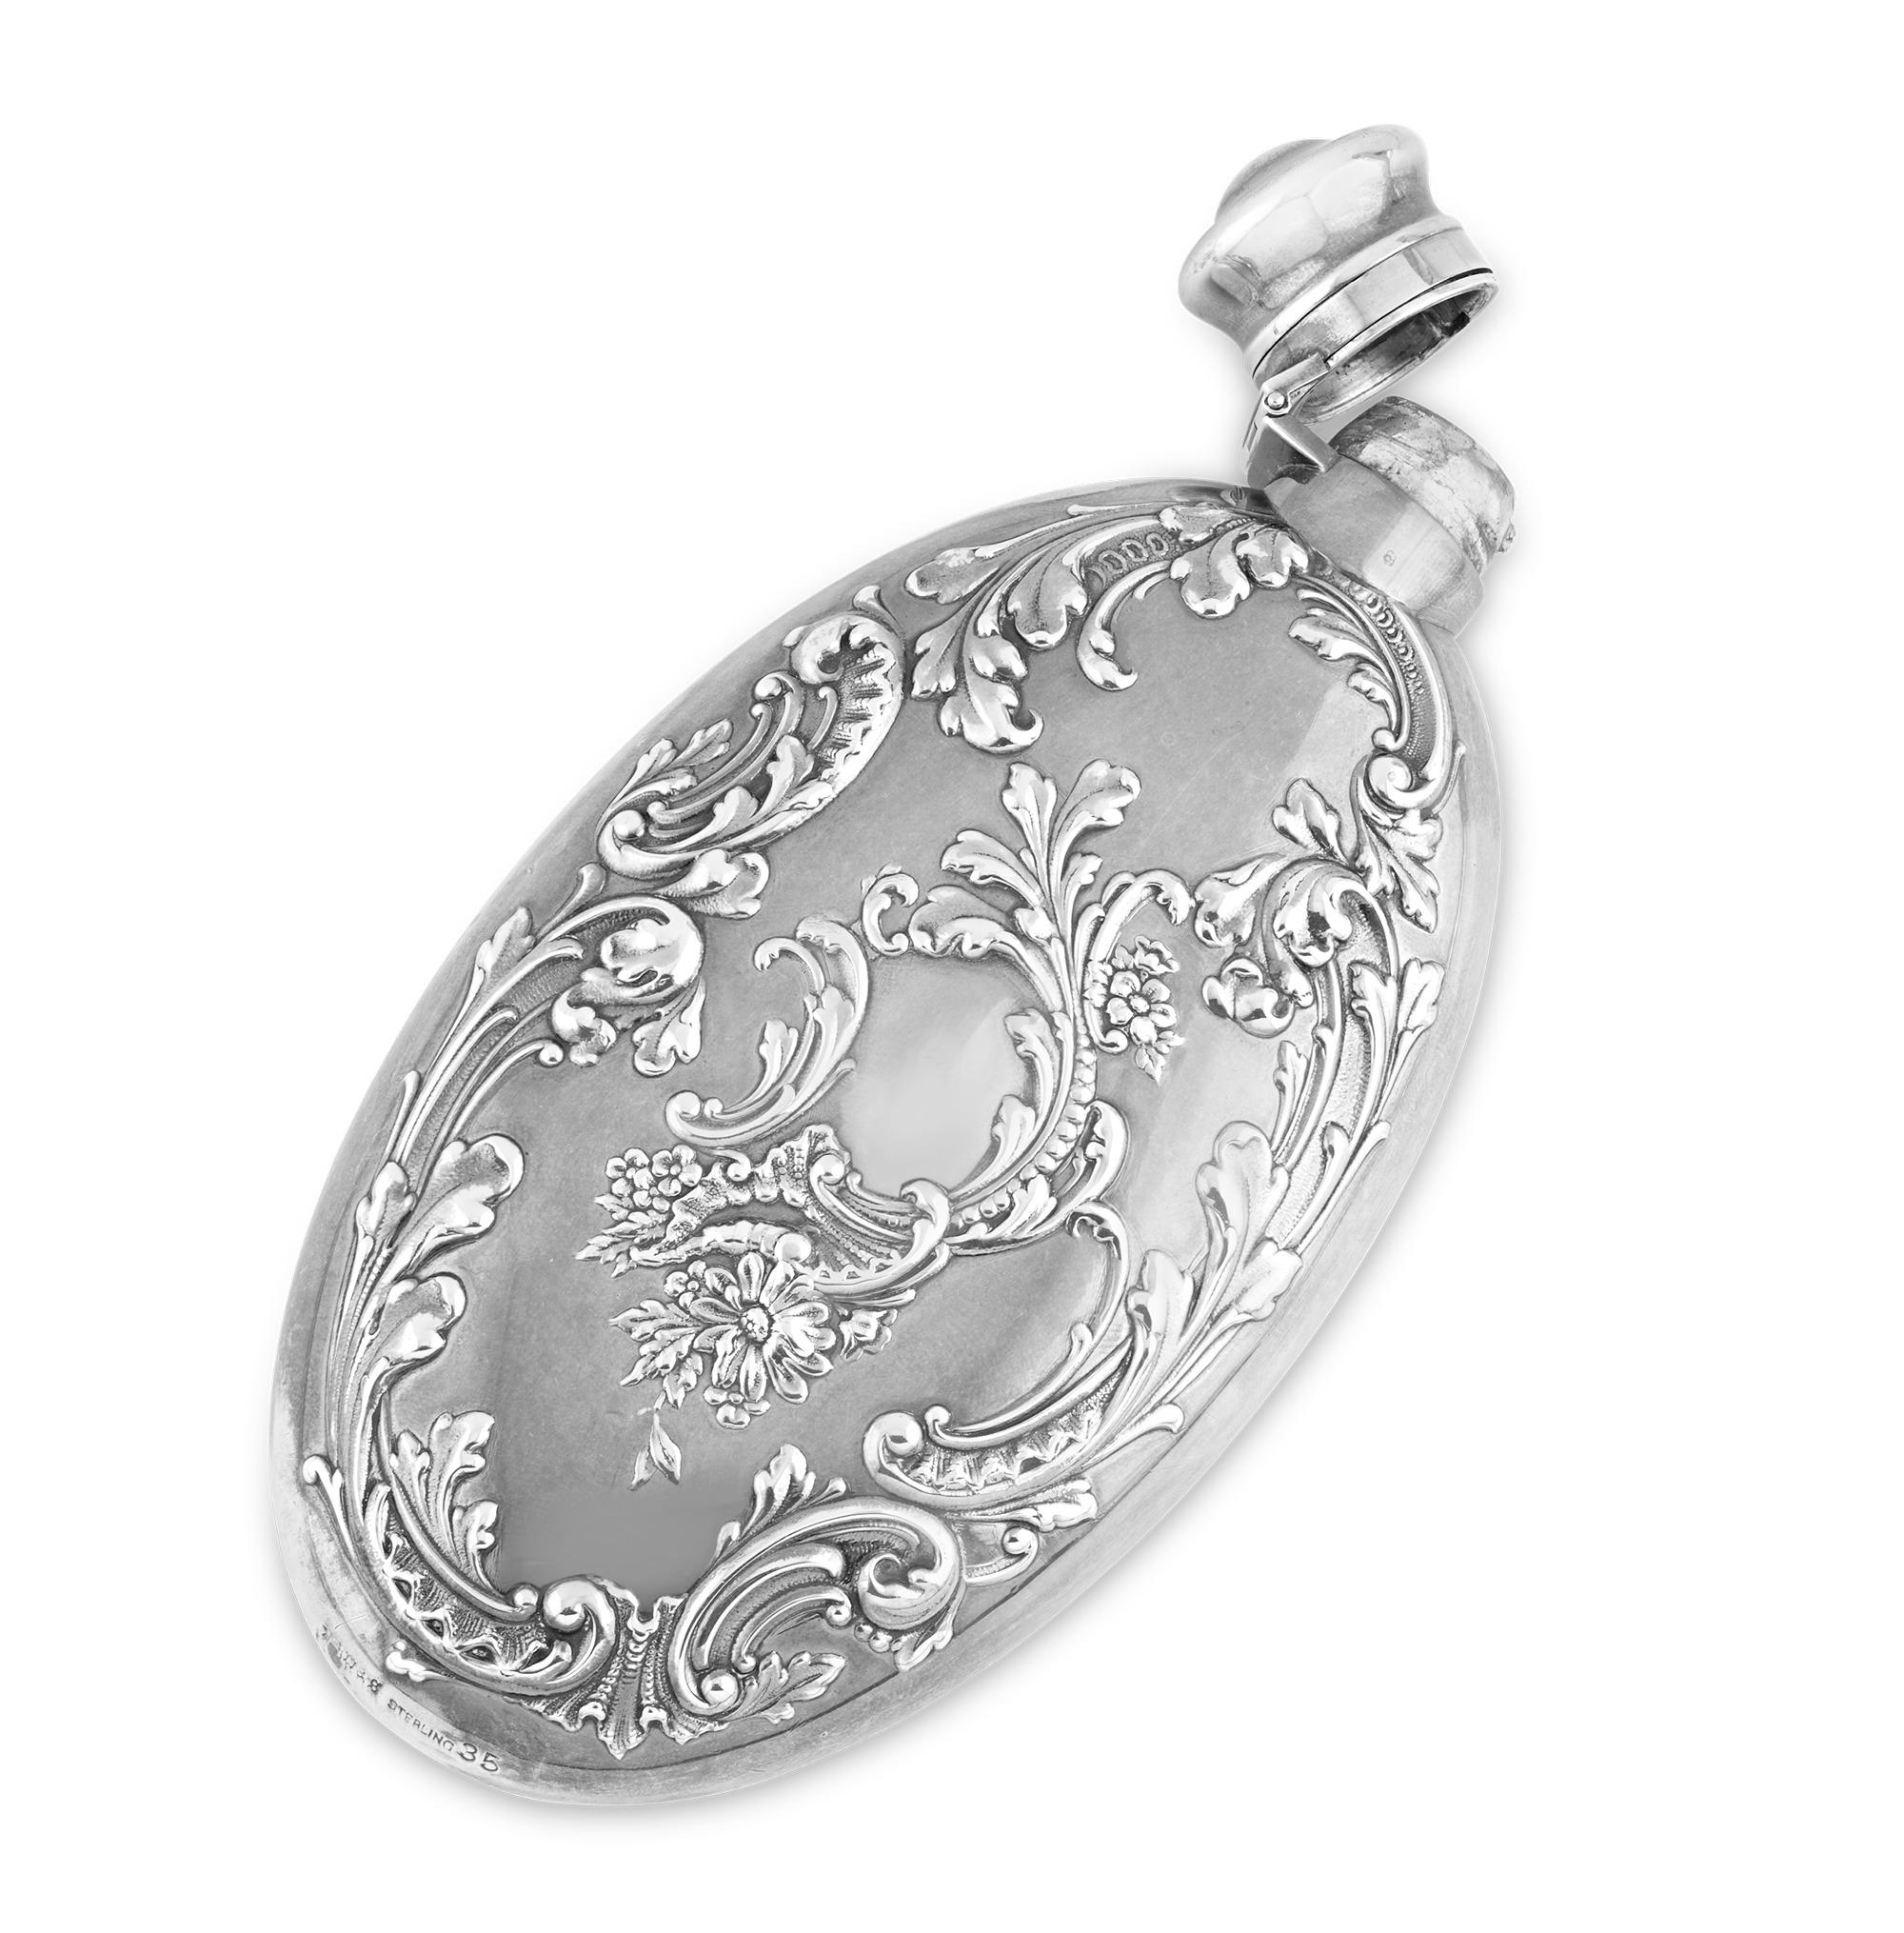 This delightful and ornate oval sterling silver flask crafted by prolific American silversmiths R. Wallace & Sons features a beautiful repoussé filigree pattern. Punctuated by blooming flowers, this flask makes a lasting impression. Known for their